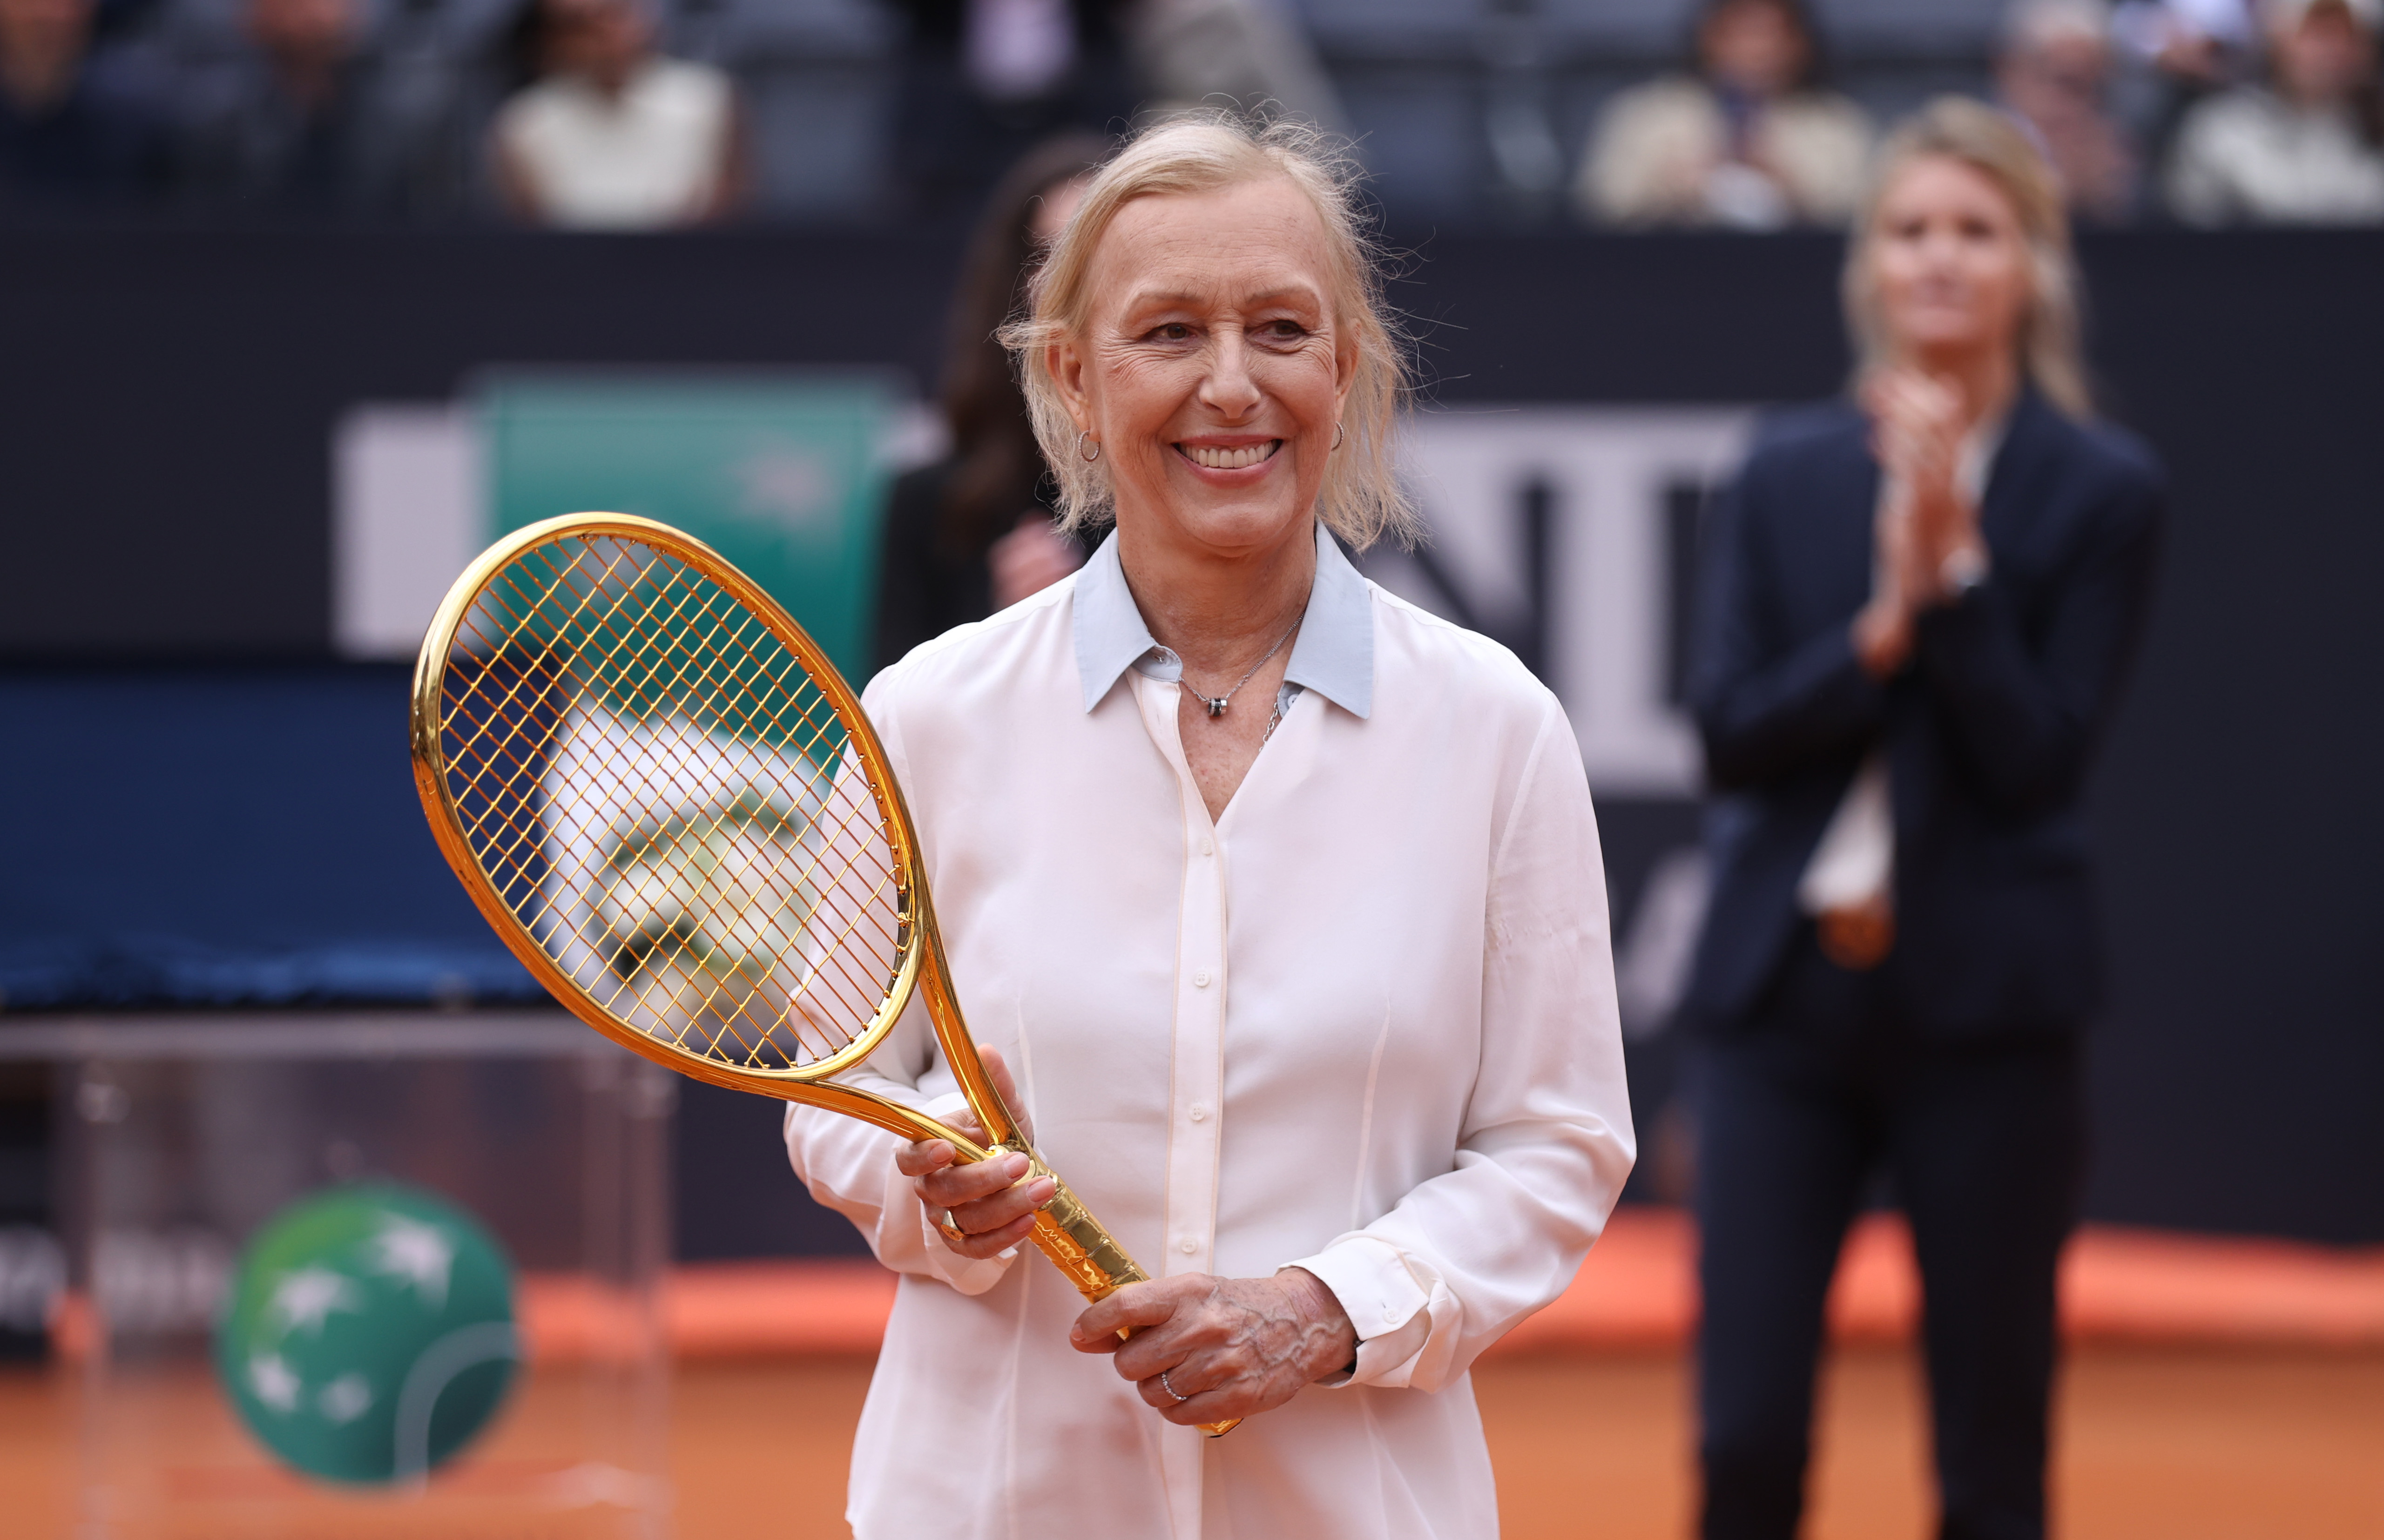 Prize Money in Rome Stinks' - Martina Navratilova Blatantly Calls Out Italian  Open Organizers for Their Indifference - EssentiallySports